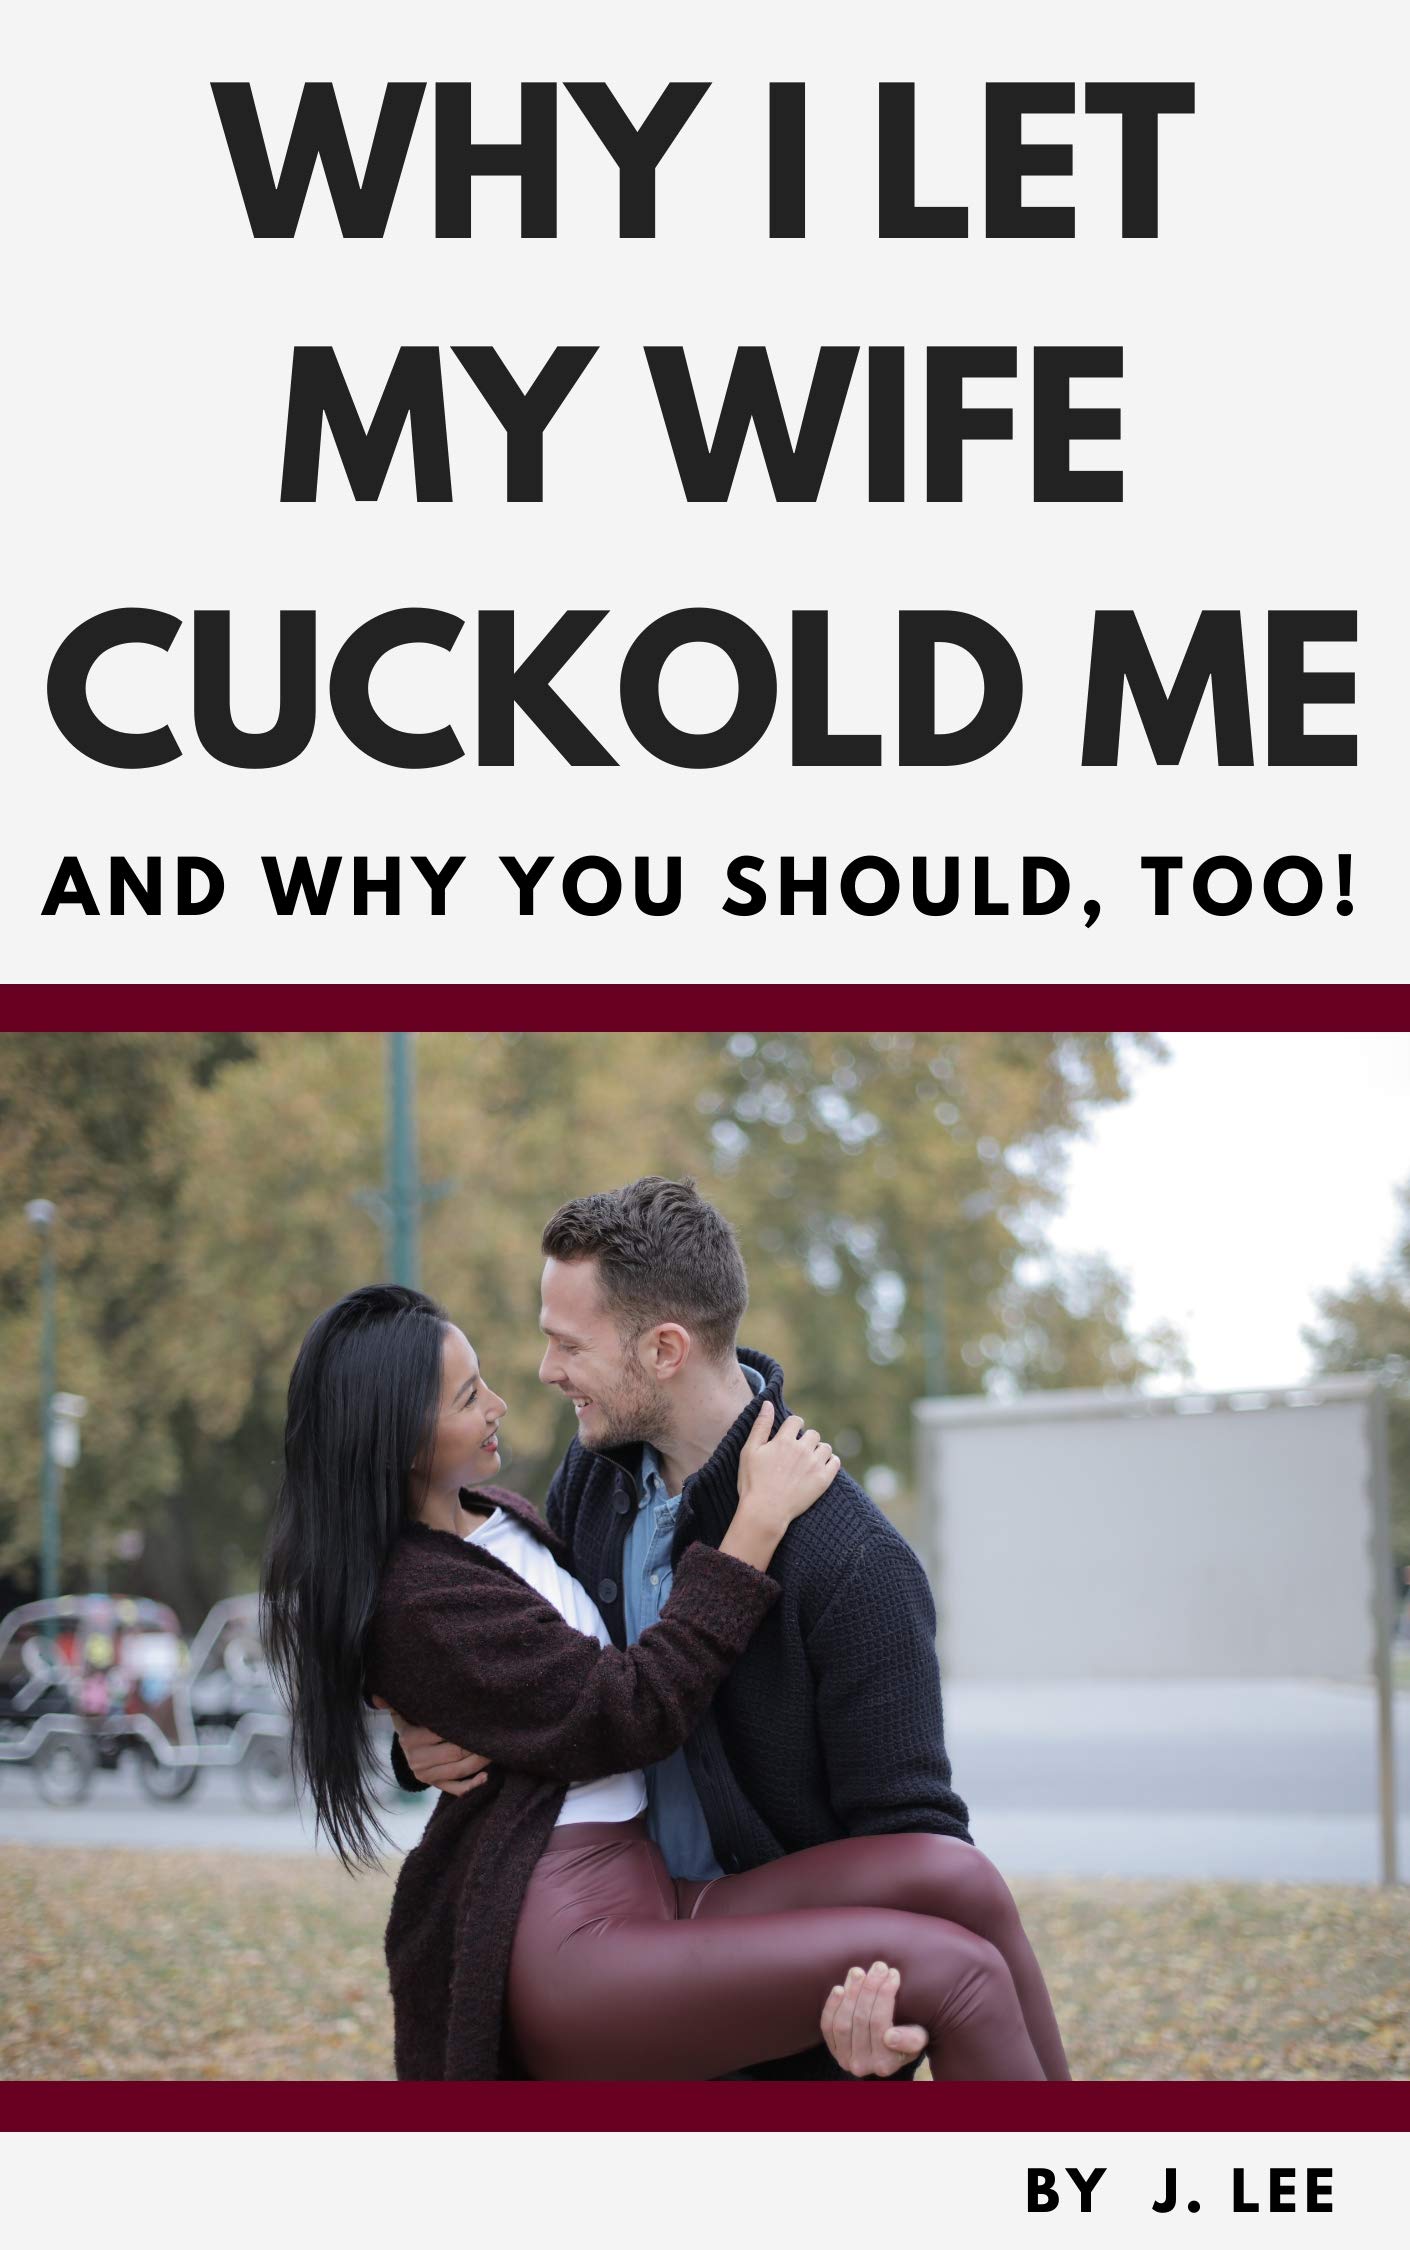 allison louise recommends my wife cucked me pic